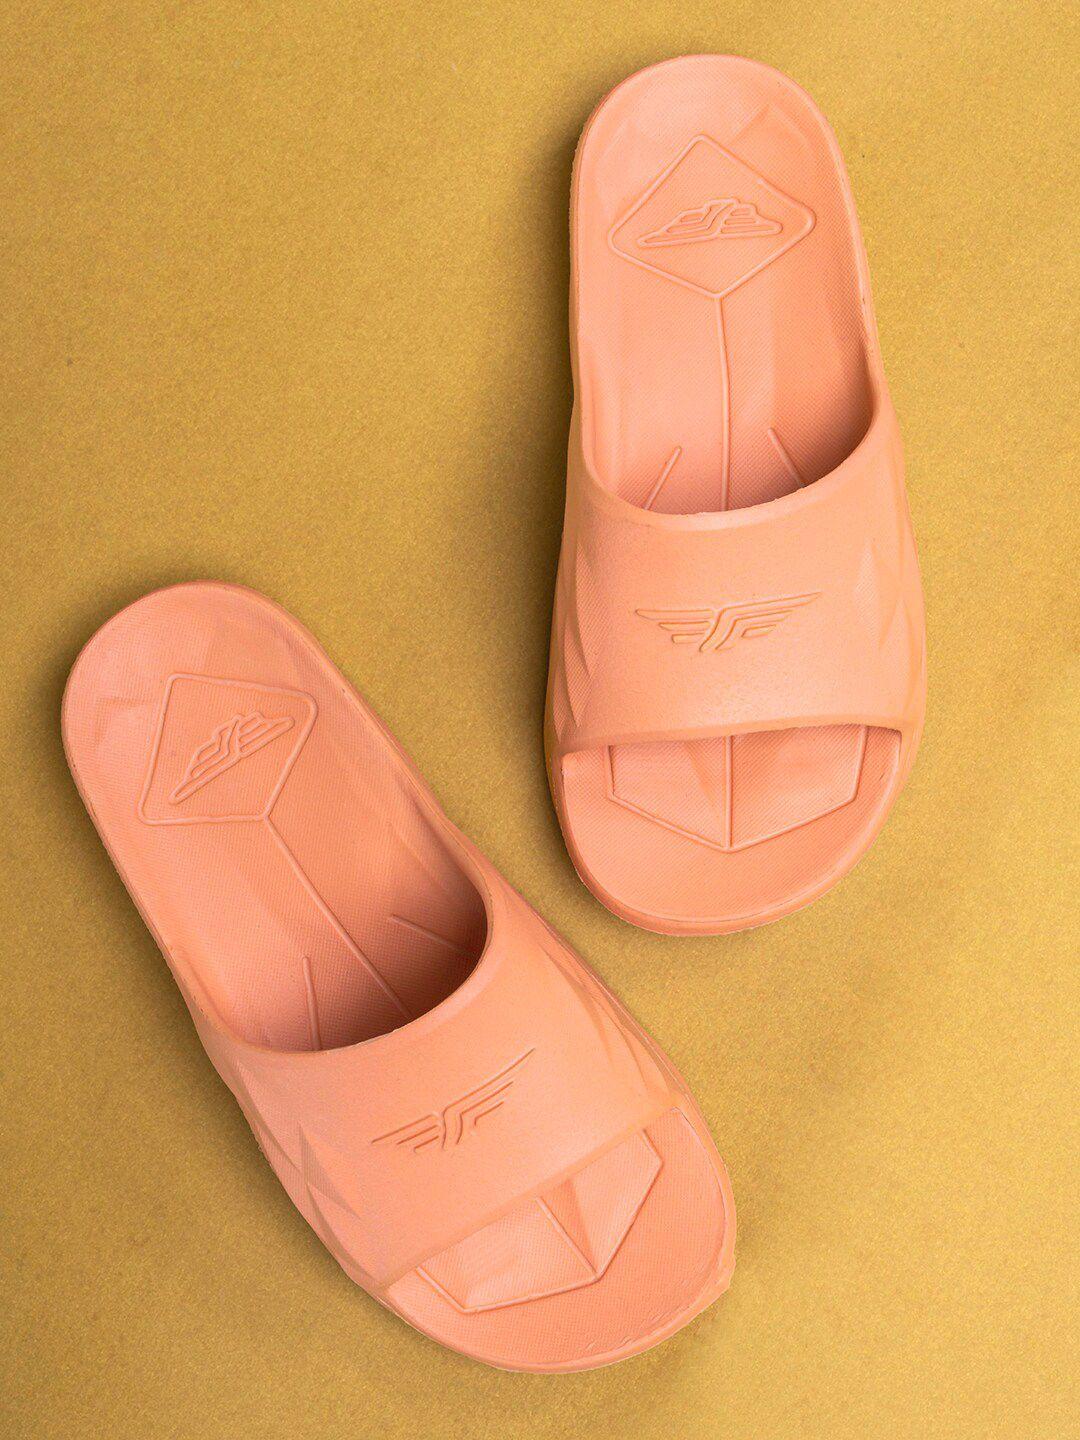 red tape unisex kids pink rubber sliders